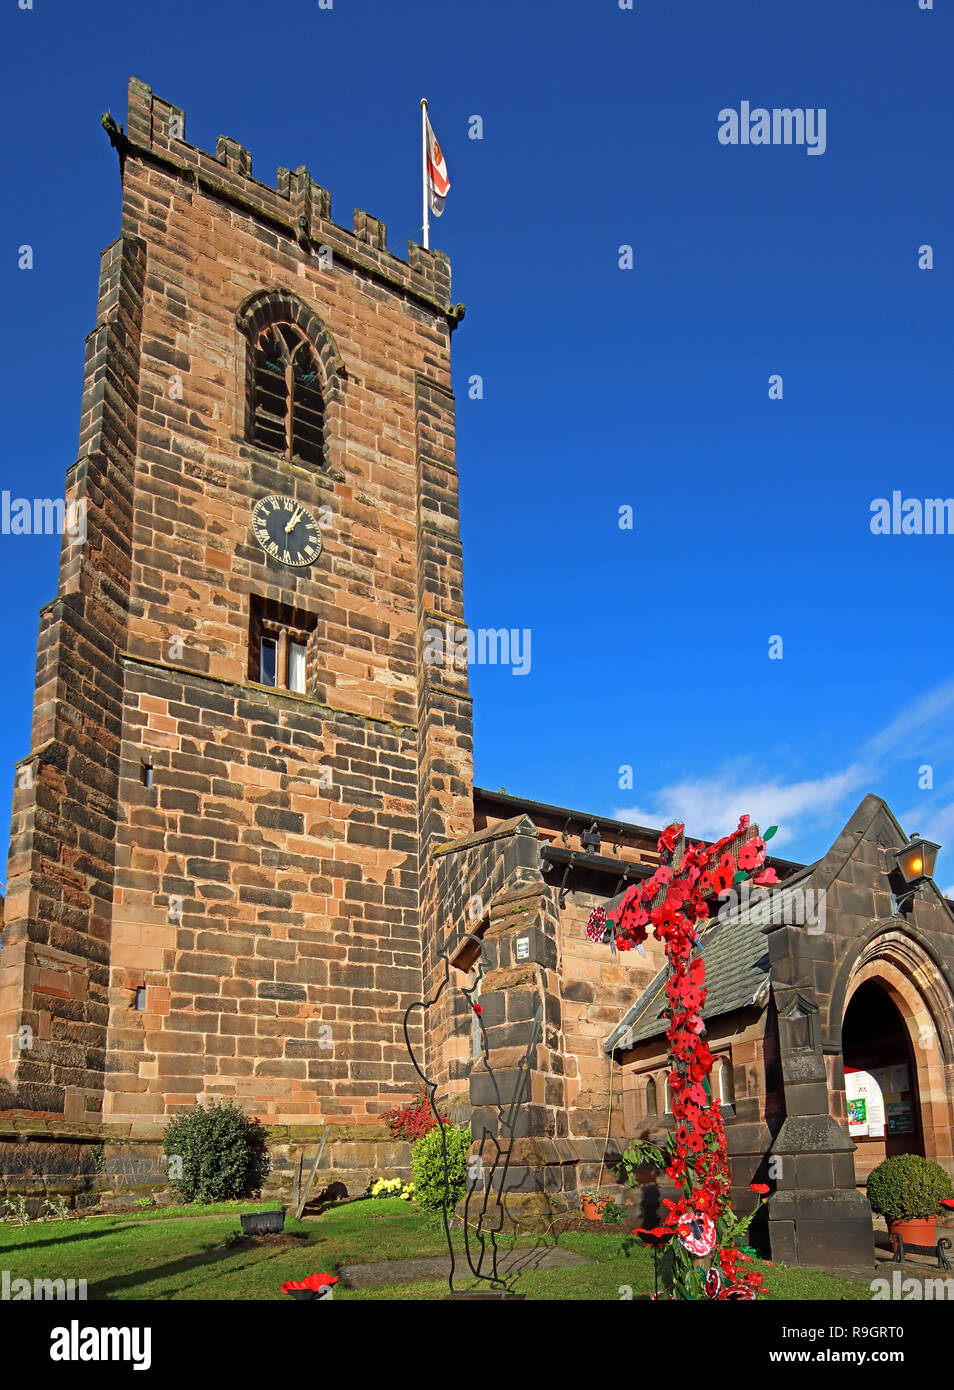 Armistice Day 11/11/2019 Red Cross of Poppies, St Wilfrids Church, Grappenhall, St Georges Flag, Warrington, Cheshire, UK, WA4 2SJ Stock Photo